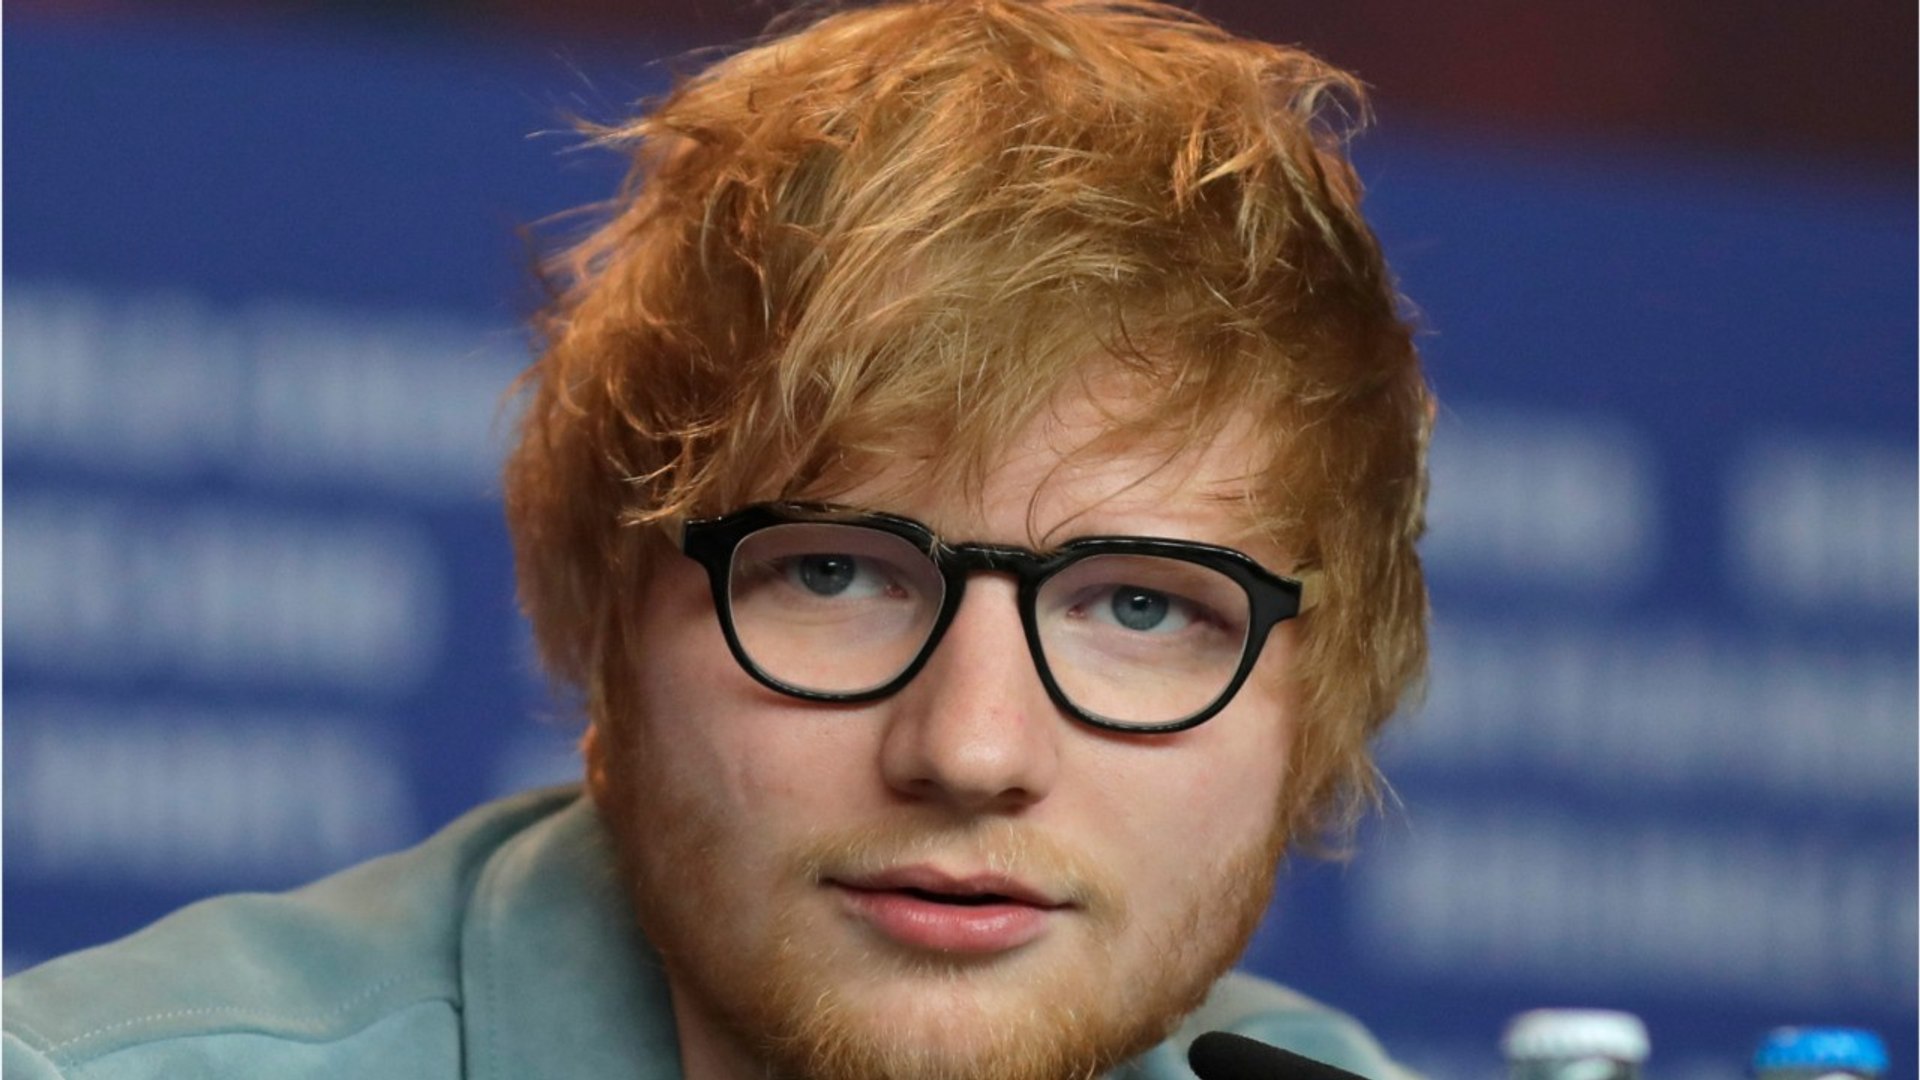 Ed Sheeran Wants To Build A Private Chapel On His Property In England